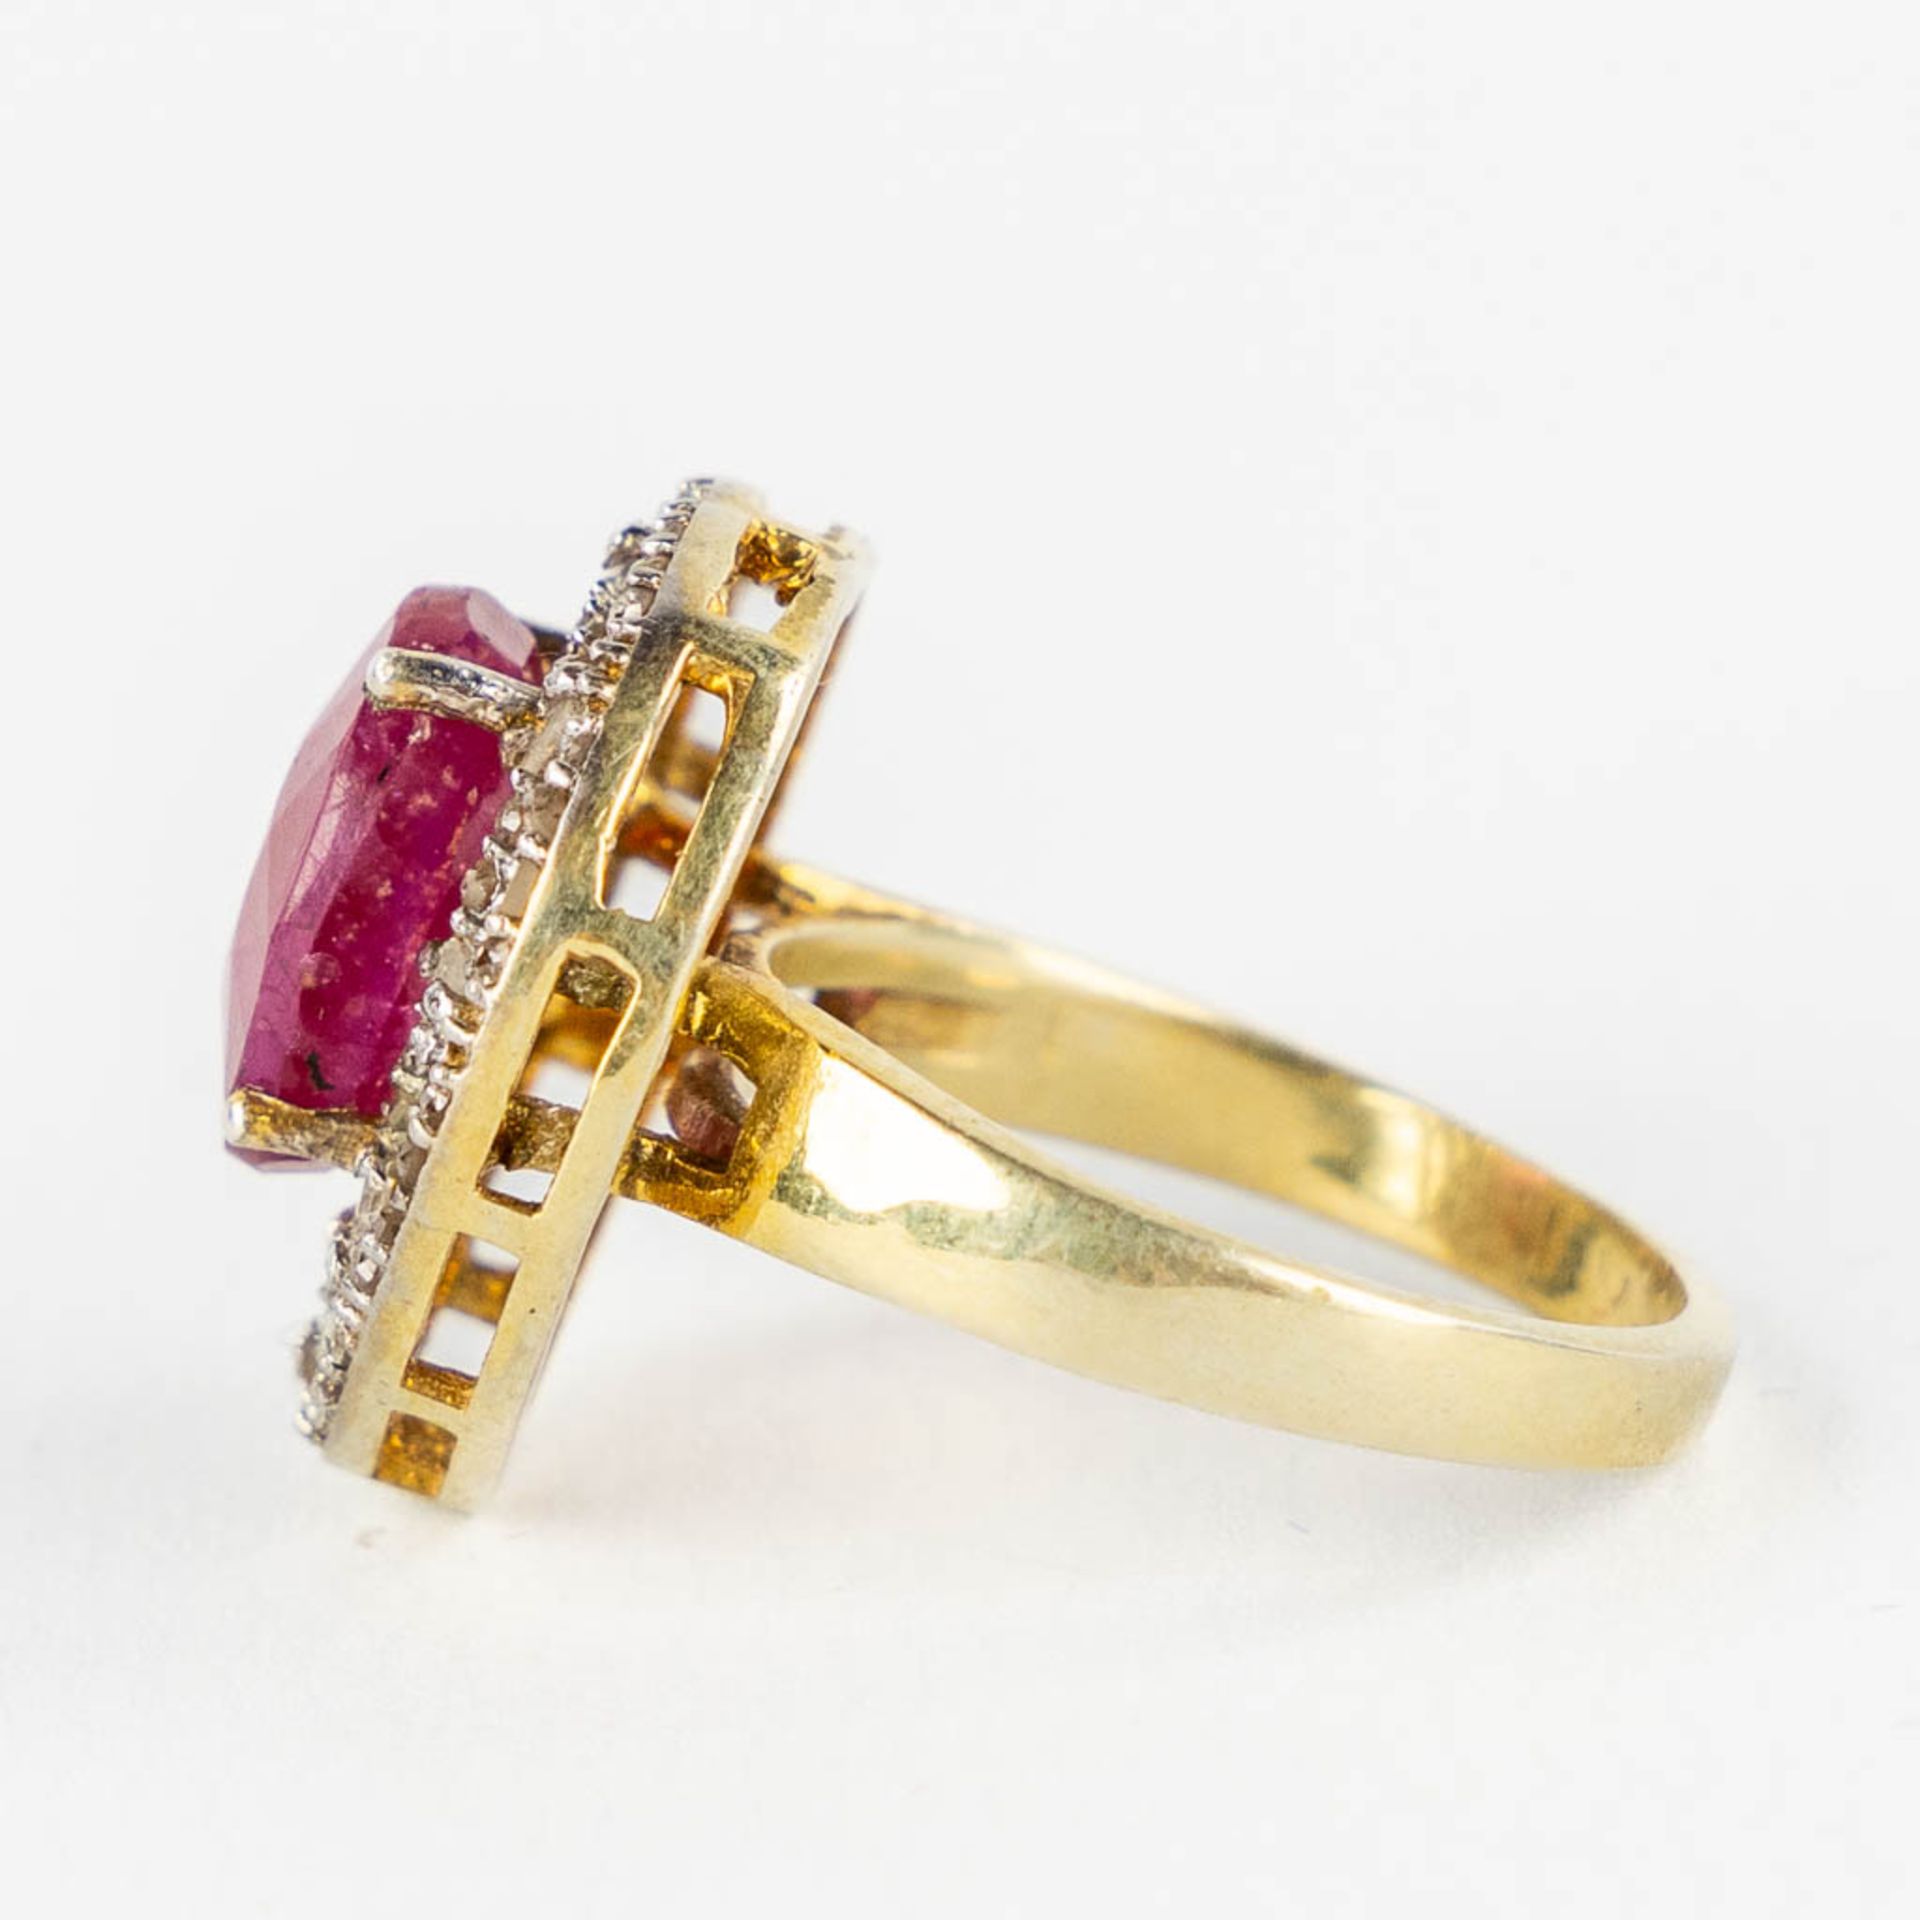 A ring, gilt silver with a facetted sapphire, old cut diamonds. 6,34g. Ring size 56. - Image 7 of 9